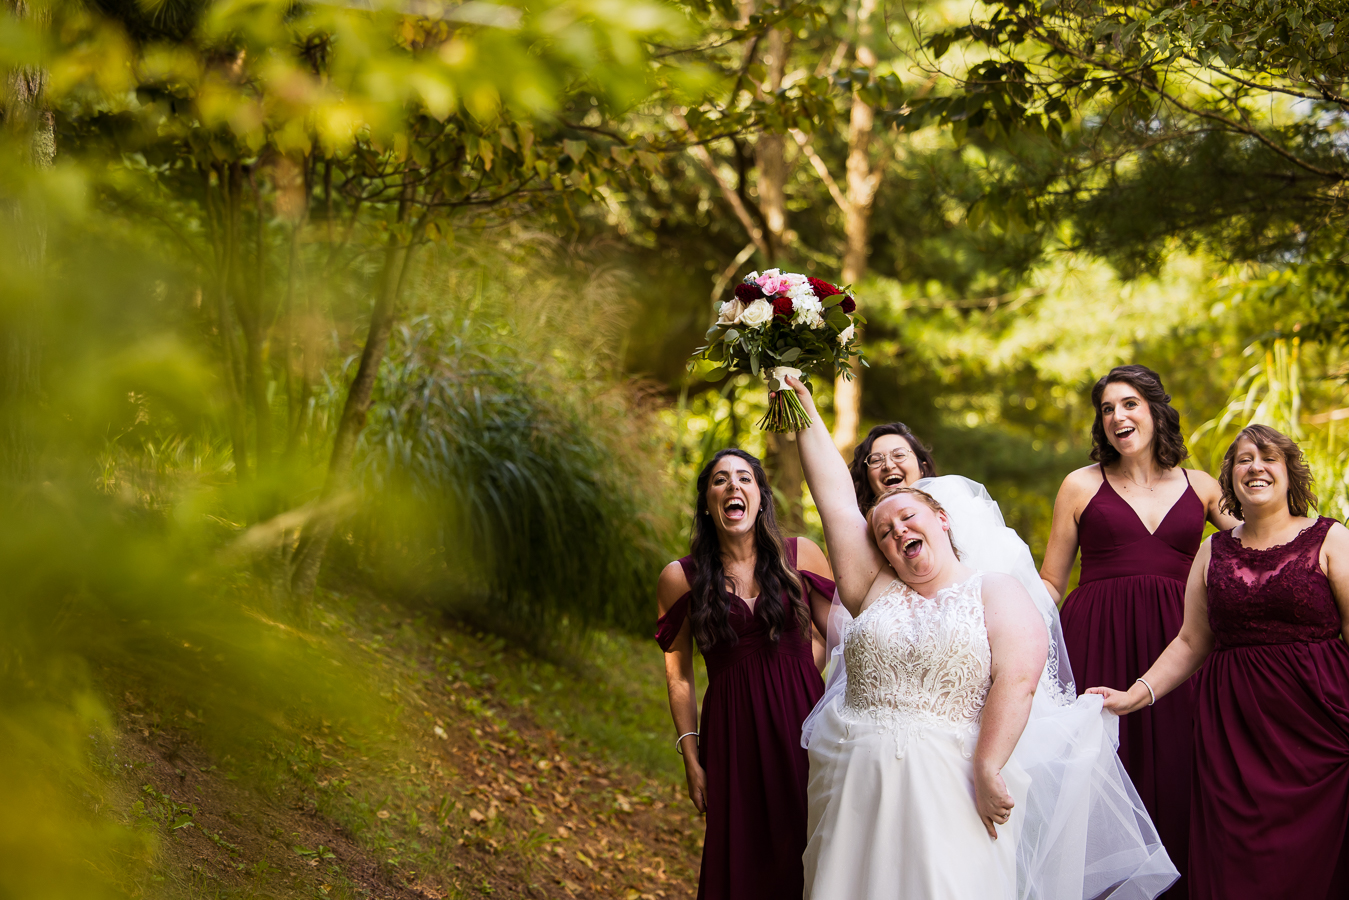 stahlstown outdoor photographer, rhinehart photography, captures this fun authentic image of the bride as she walks down the vibrant greenery outdoor pathway with her bridesmaids behind her as they smile and laugh together before the wedding ceremony at oak lodge